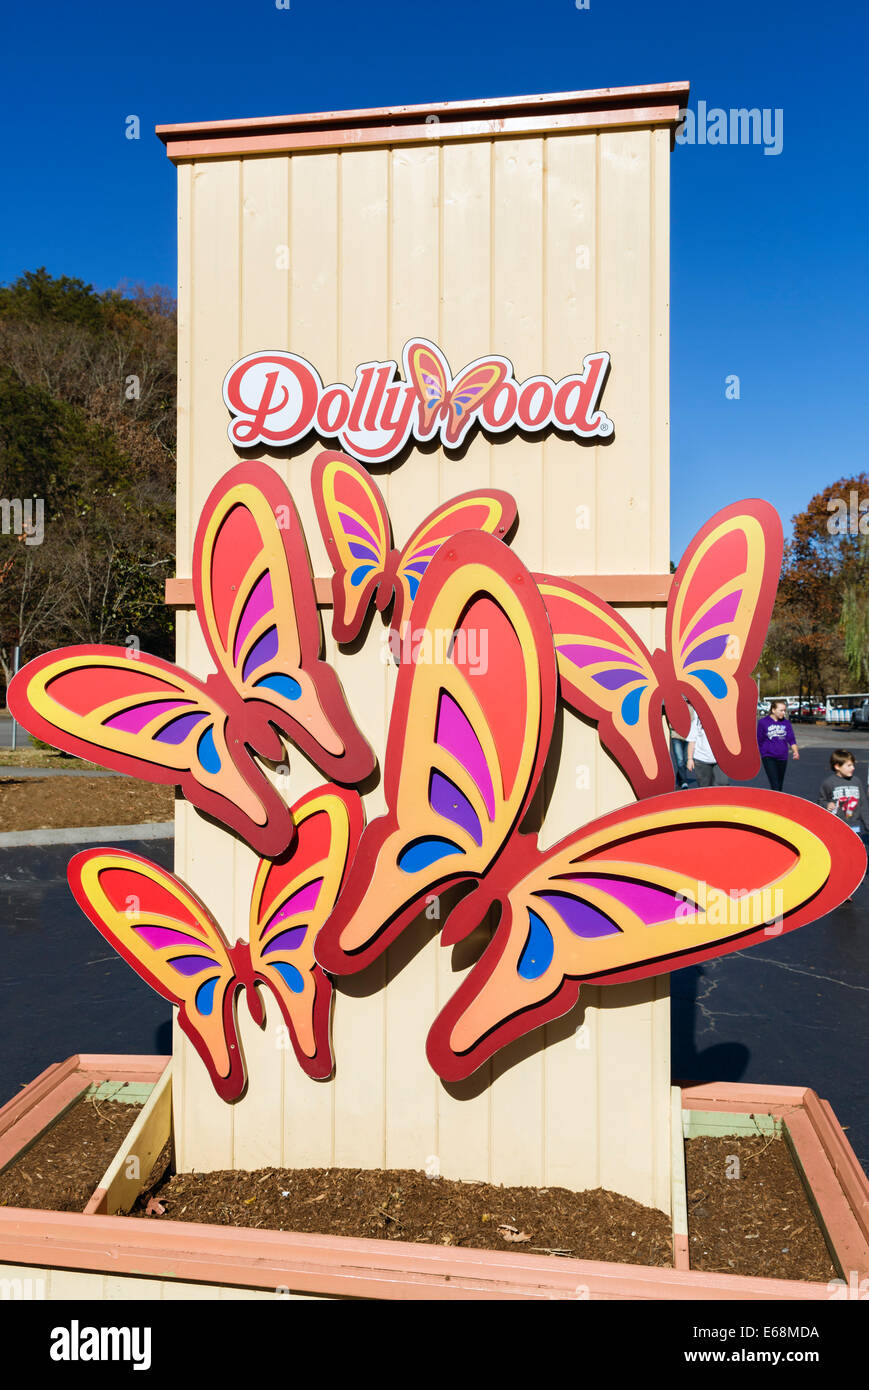 Sign at the entrance to Dollywood theme park, Pigeon Forge, Tennessee, USA Stock Photo